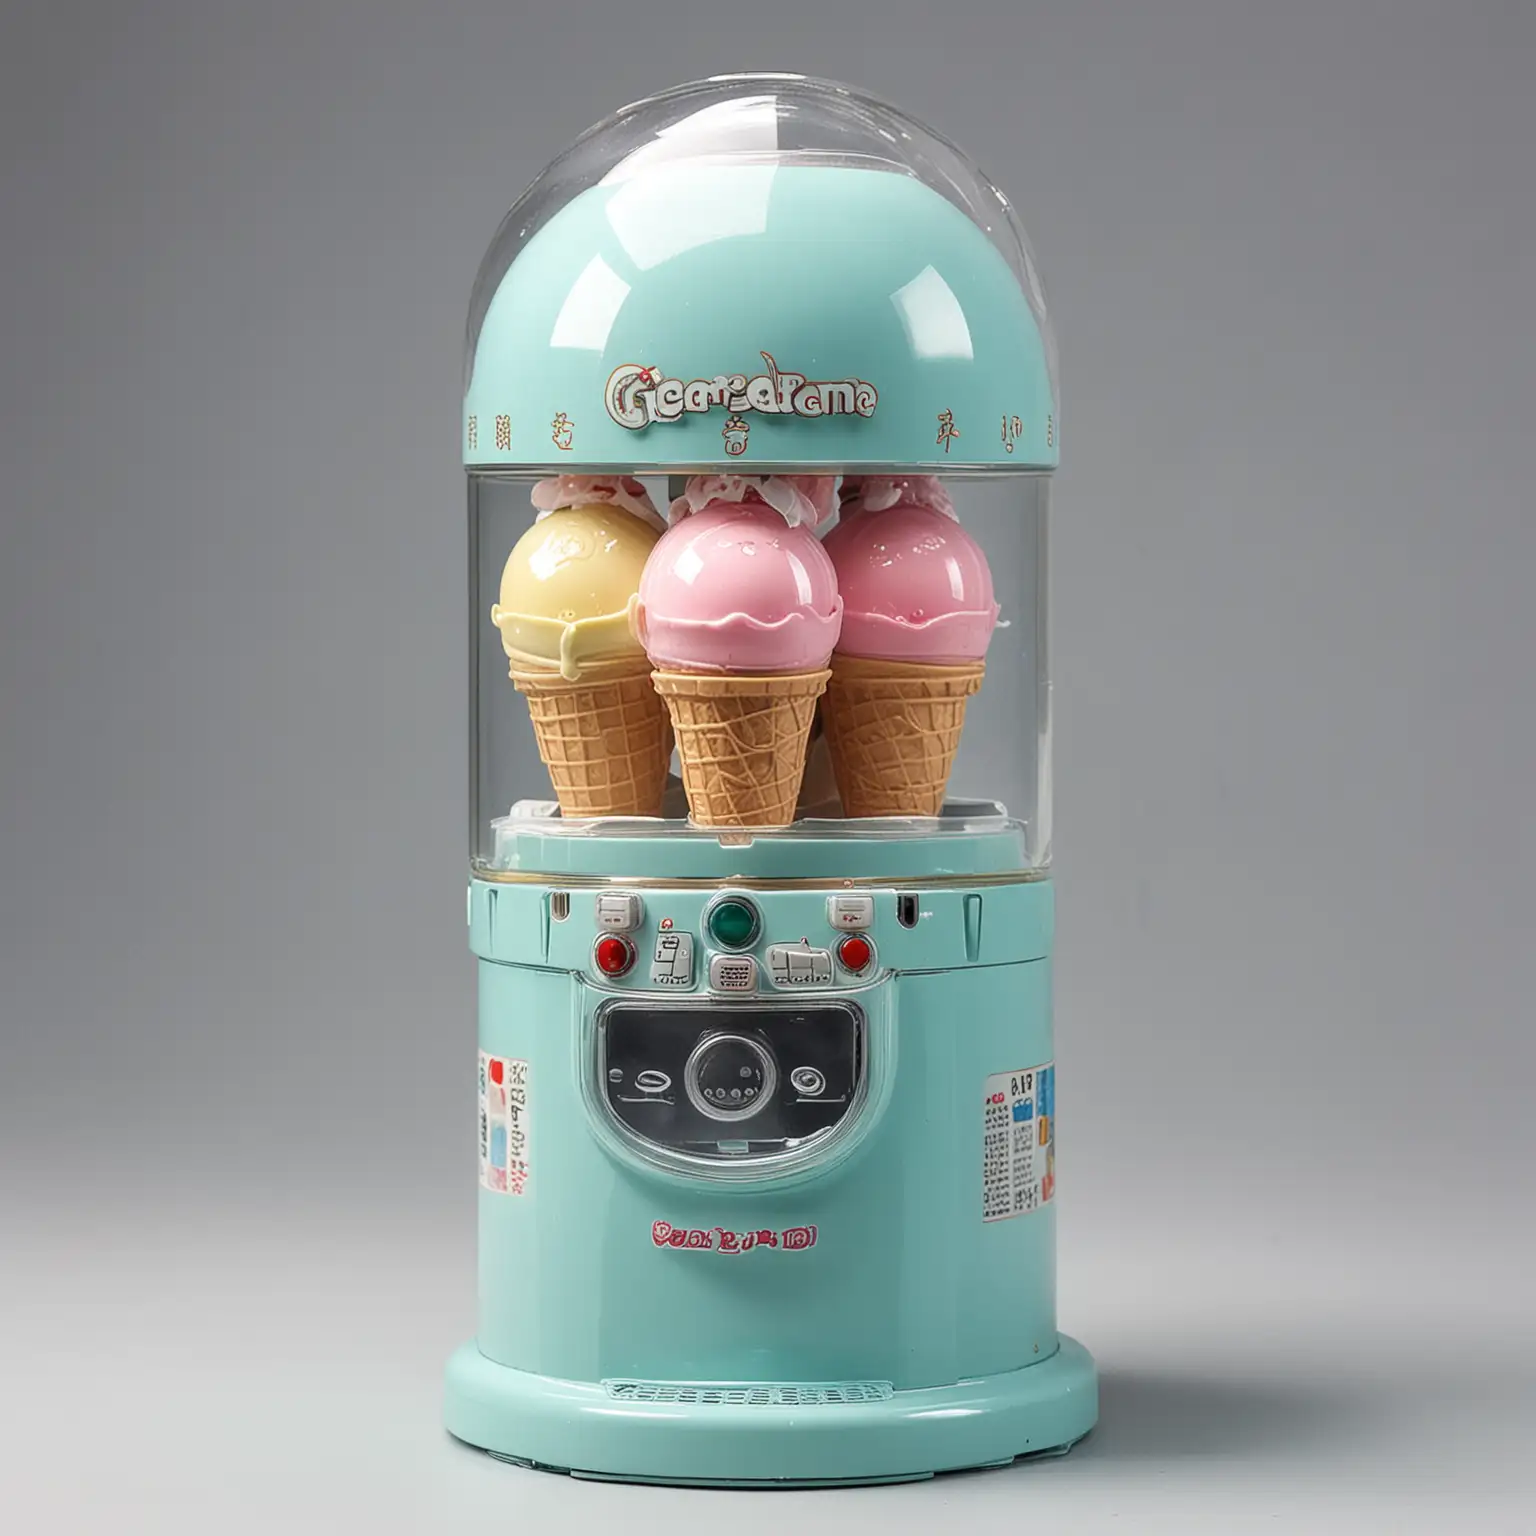 Gacha-Machine-with-Big-Turn-Dial-and-Transparent-Round-Ball-in-Ice-Cream-Colors